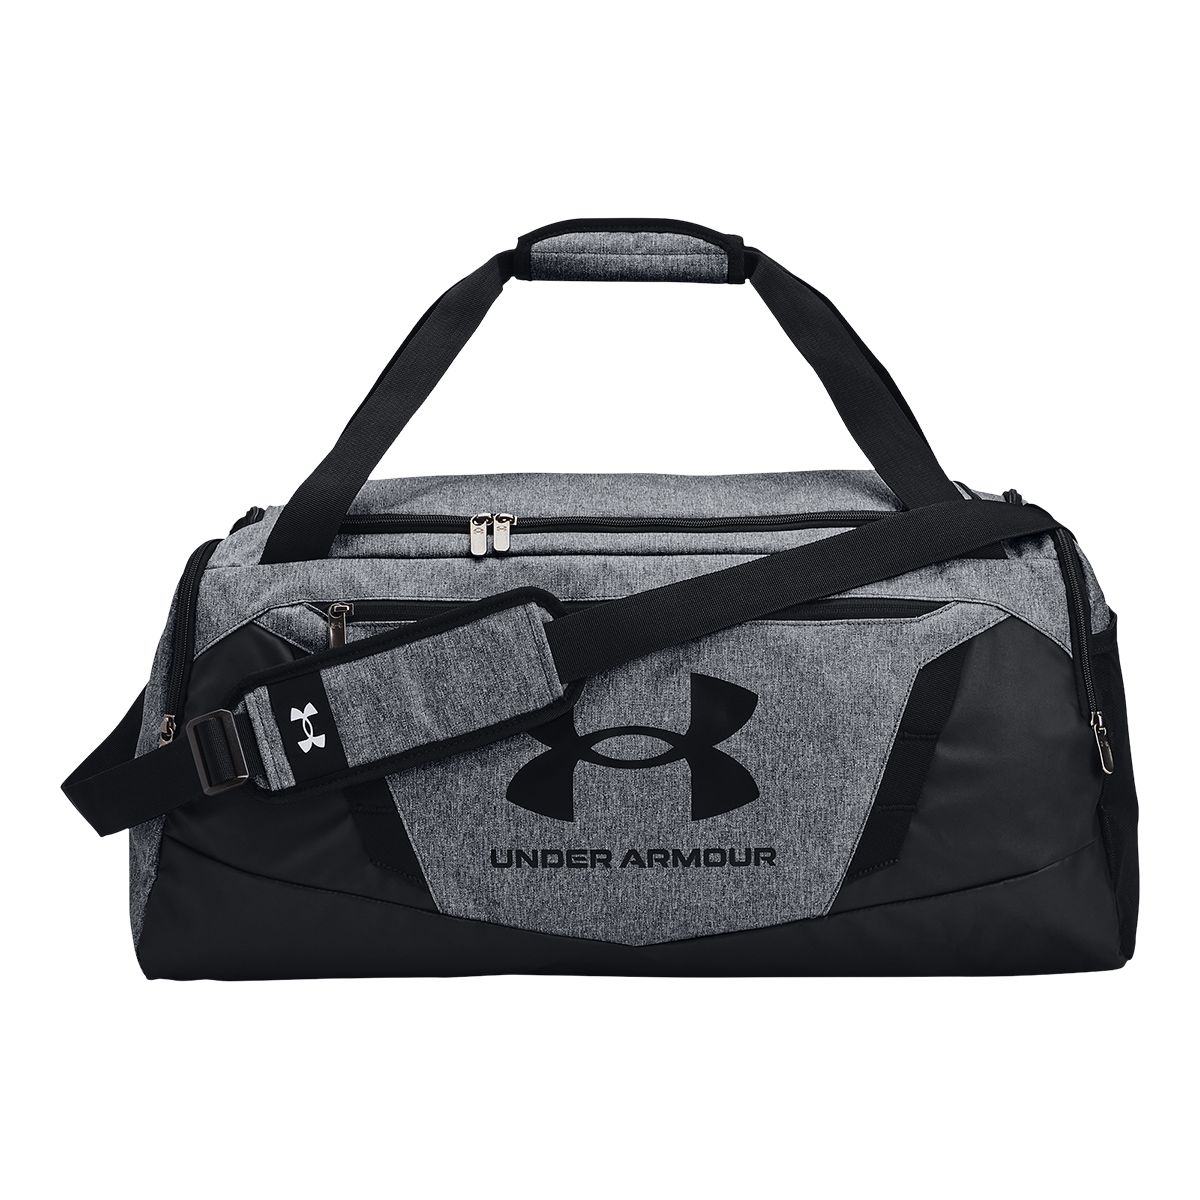 Under Armour Undeniable 5.0 Duffel Bag Water Repellent